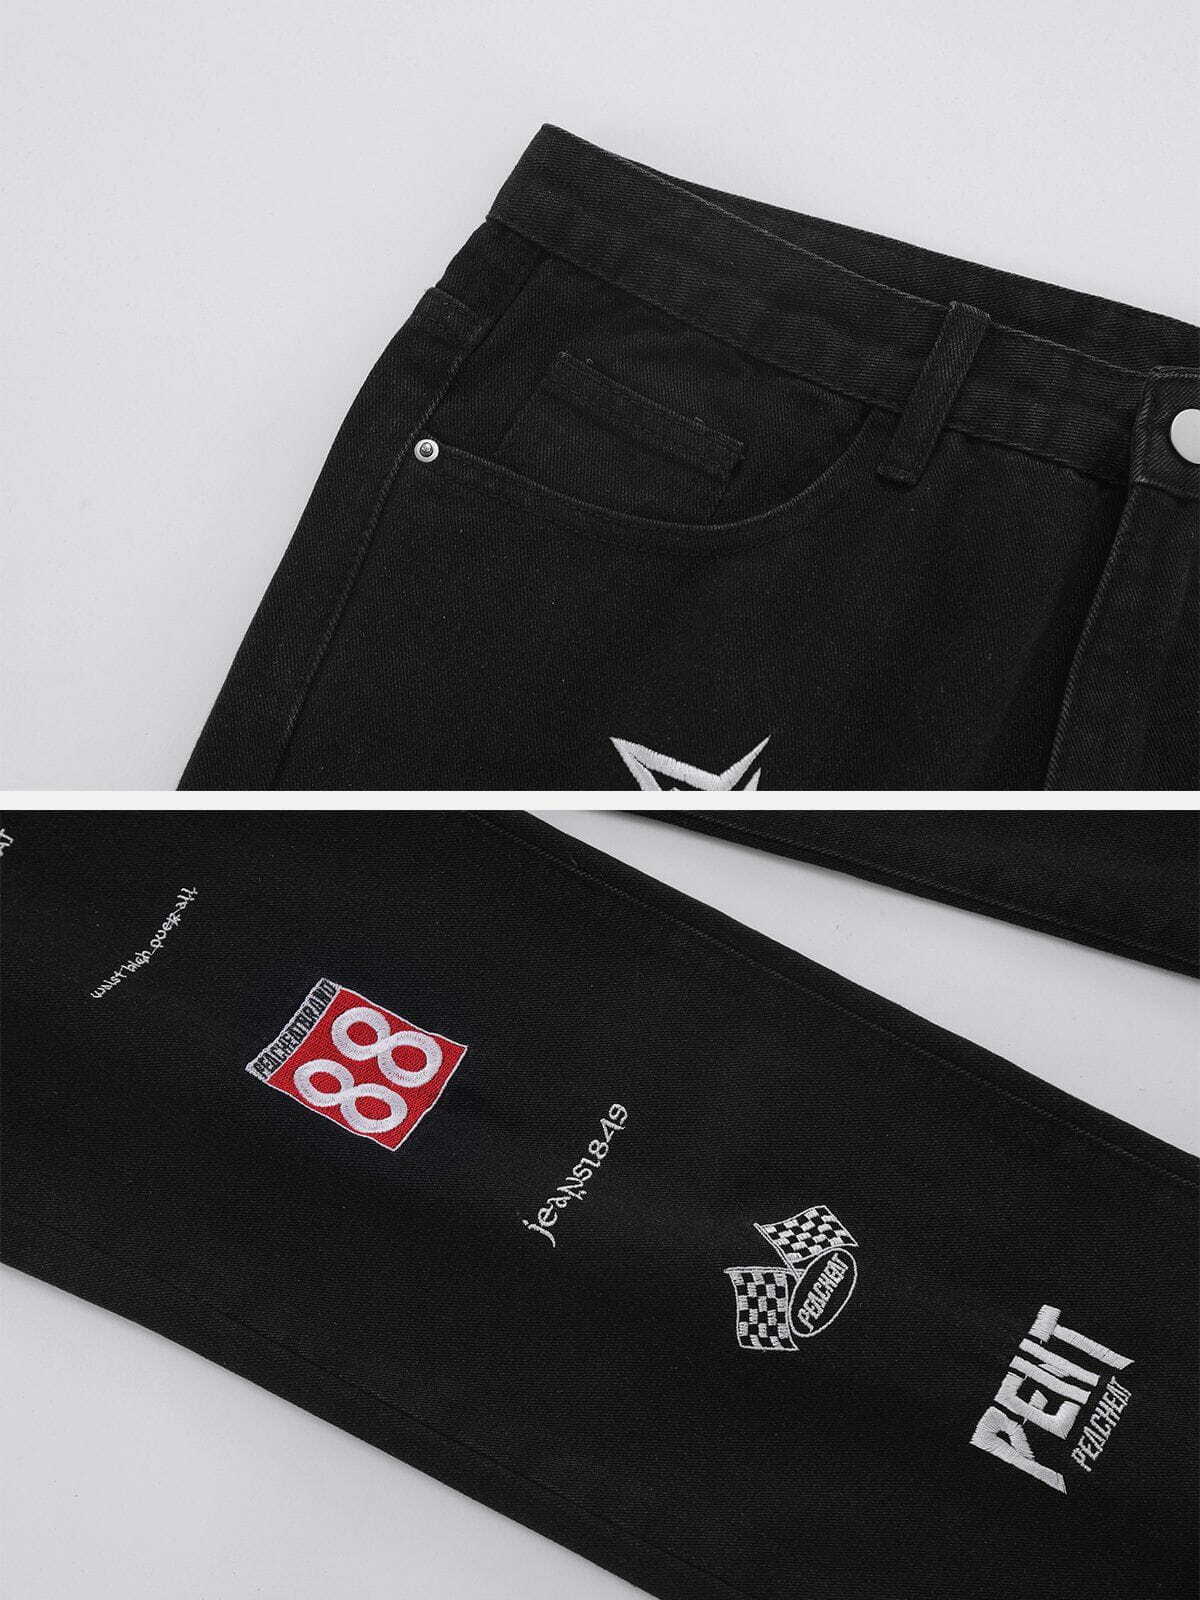 custom embroidered badge jeans edgy & unique streetwear 3580